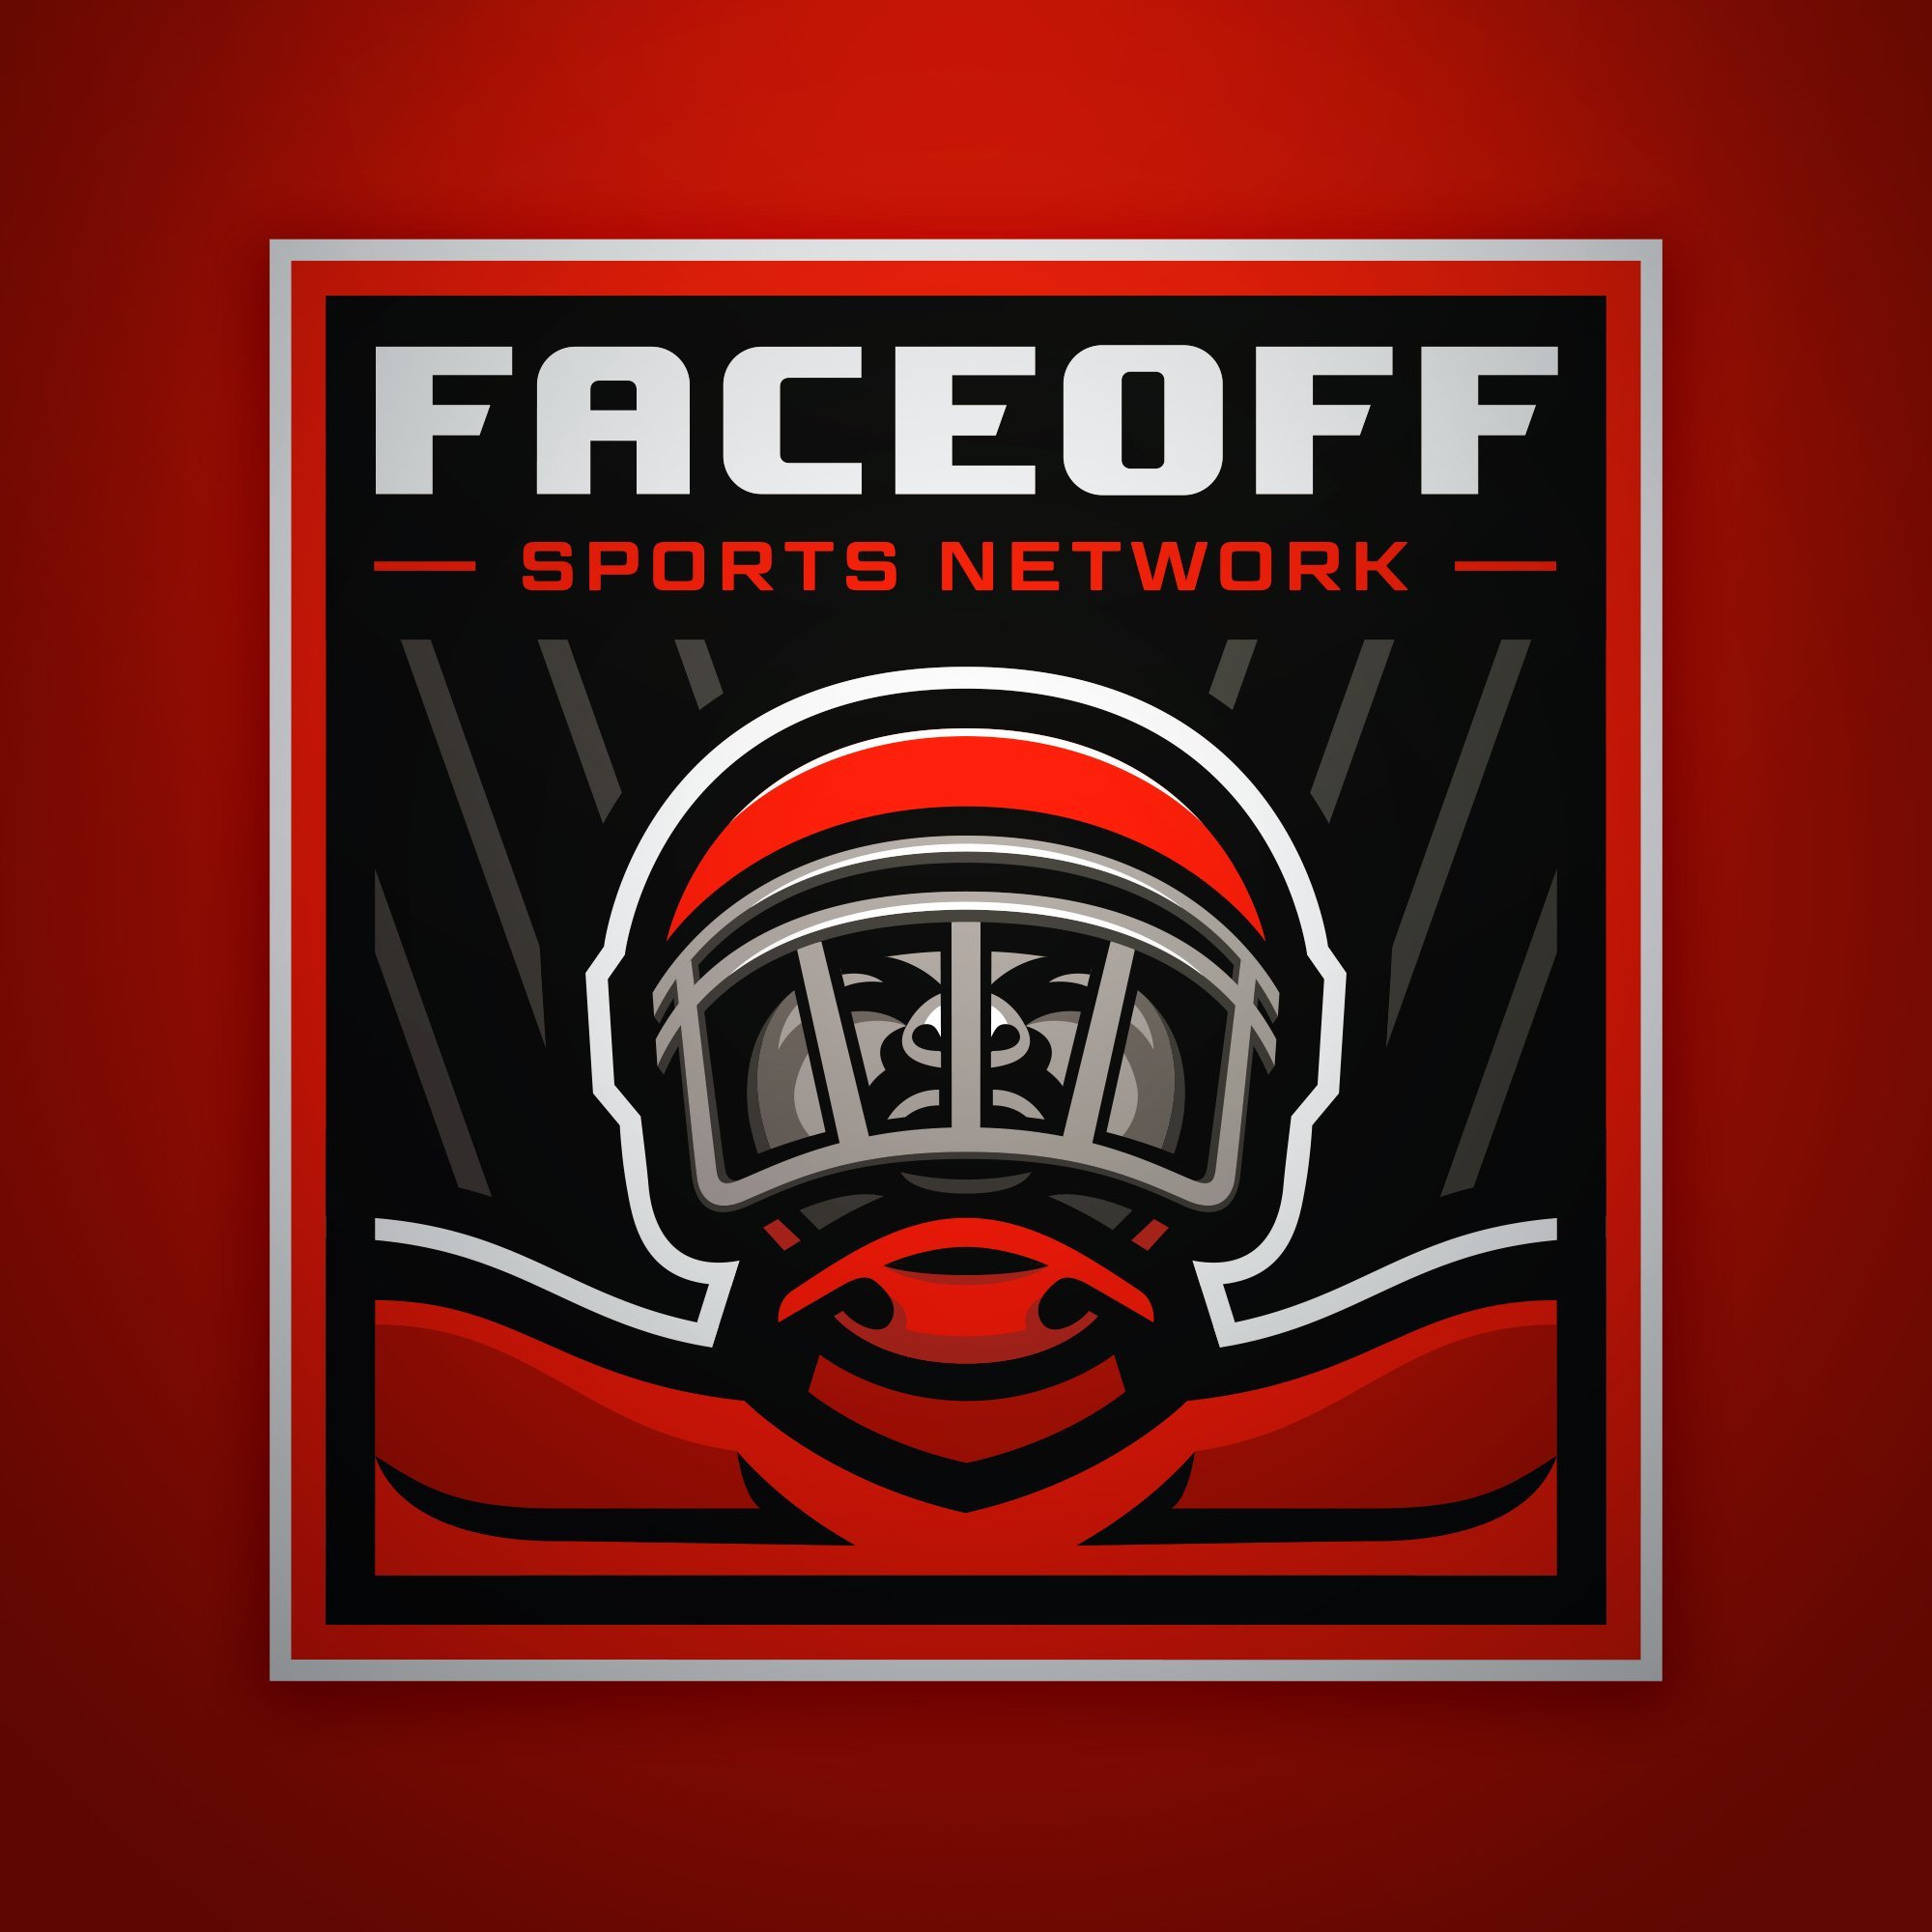 FACEOFF SPORTS NETWORK